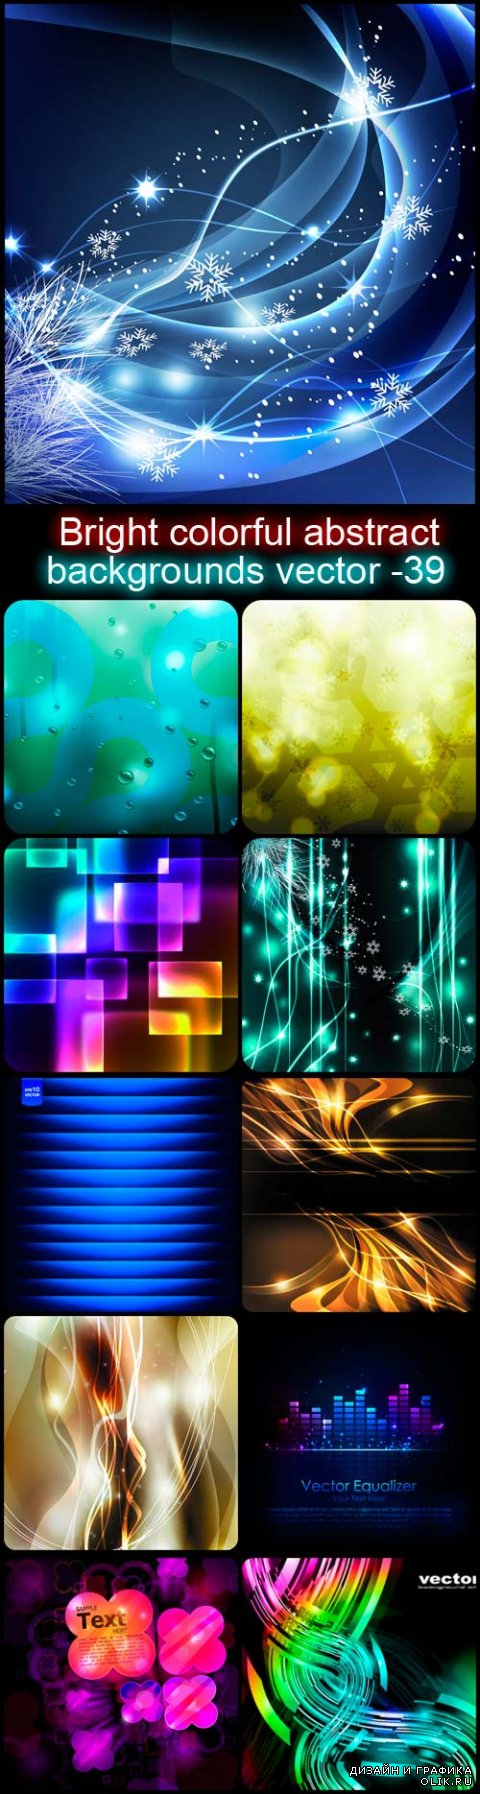 Bright colorful abstract backgrounds vector -39